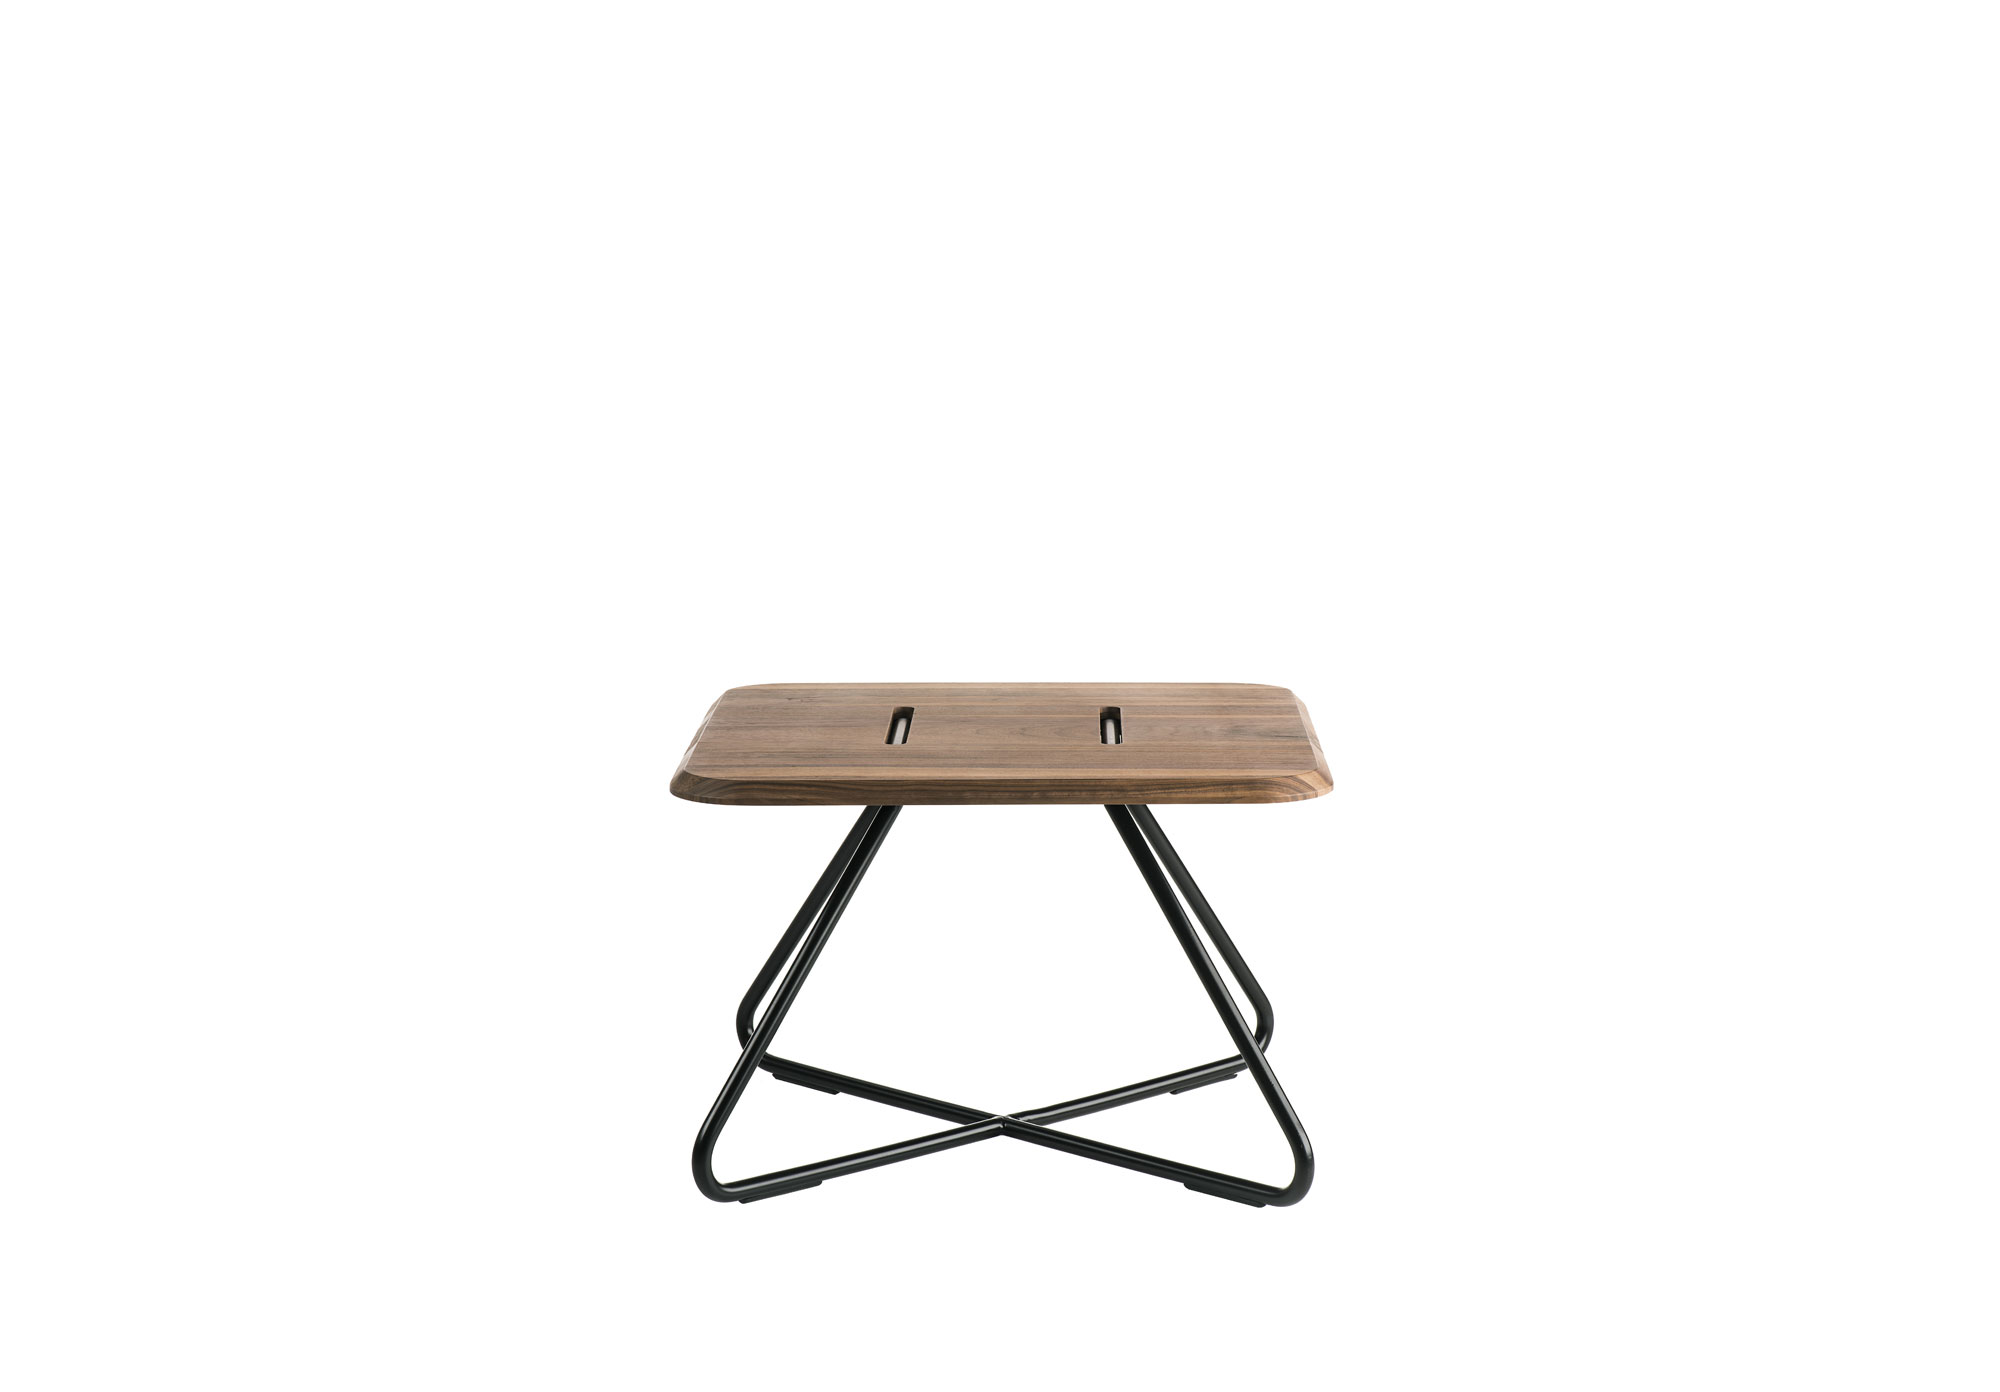 Occasional low table wood and black by Altek Italia Design